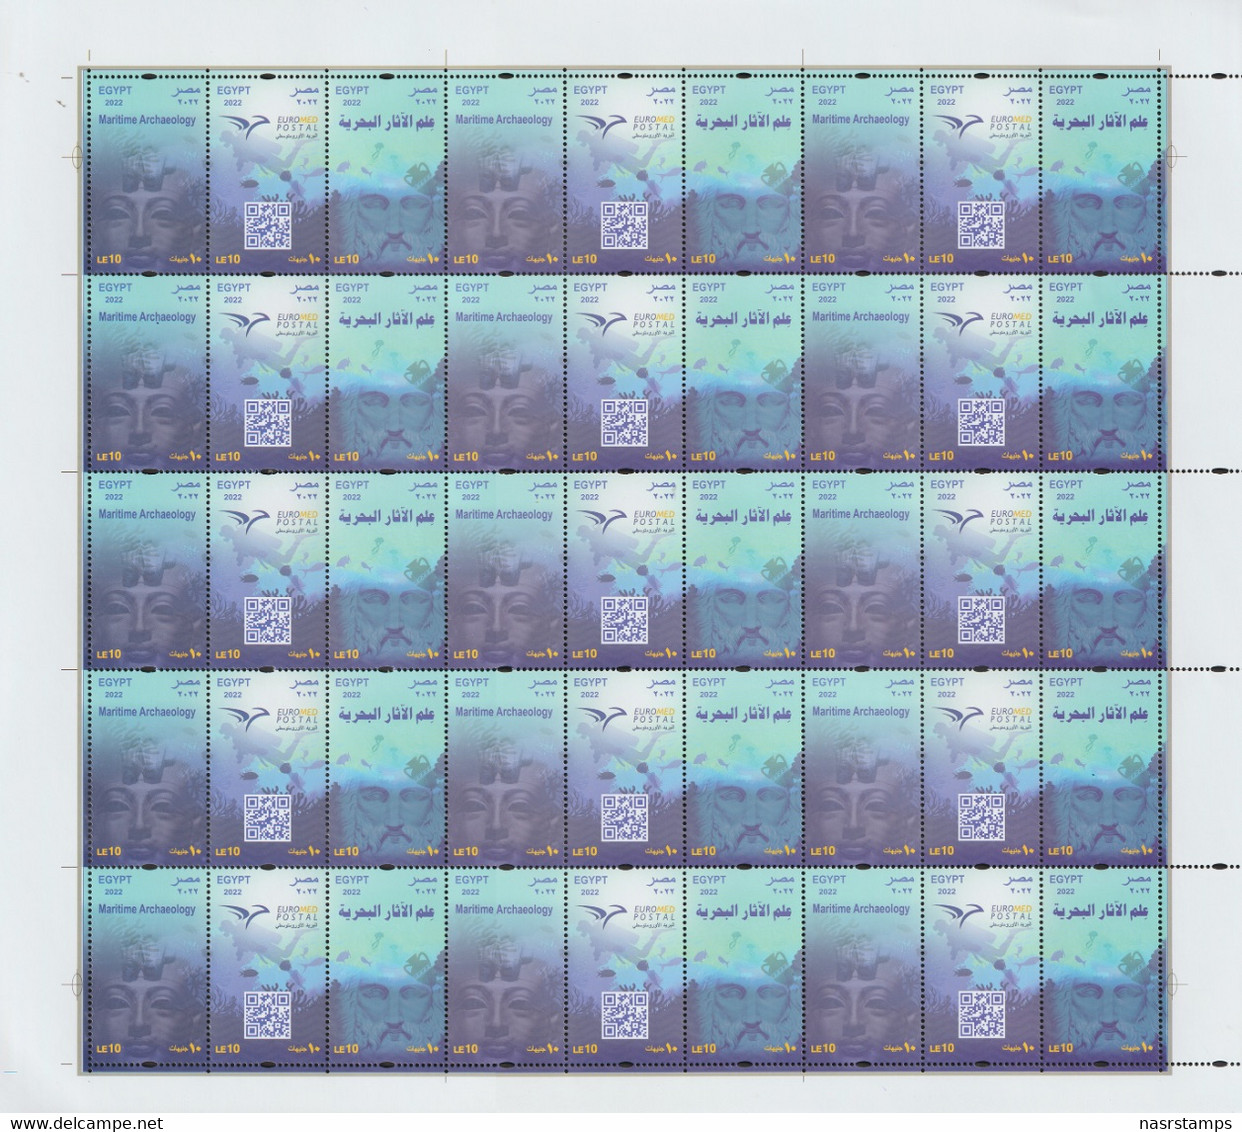 Egypt - 2022 - Sheet Of 15 Sets - ( EUROMED Postal - Maritime Archaeology ) - MNH (**) - Joint Issues